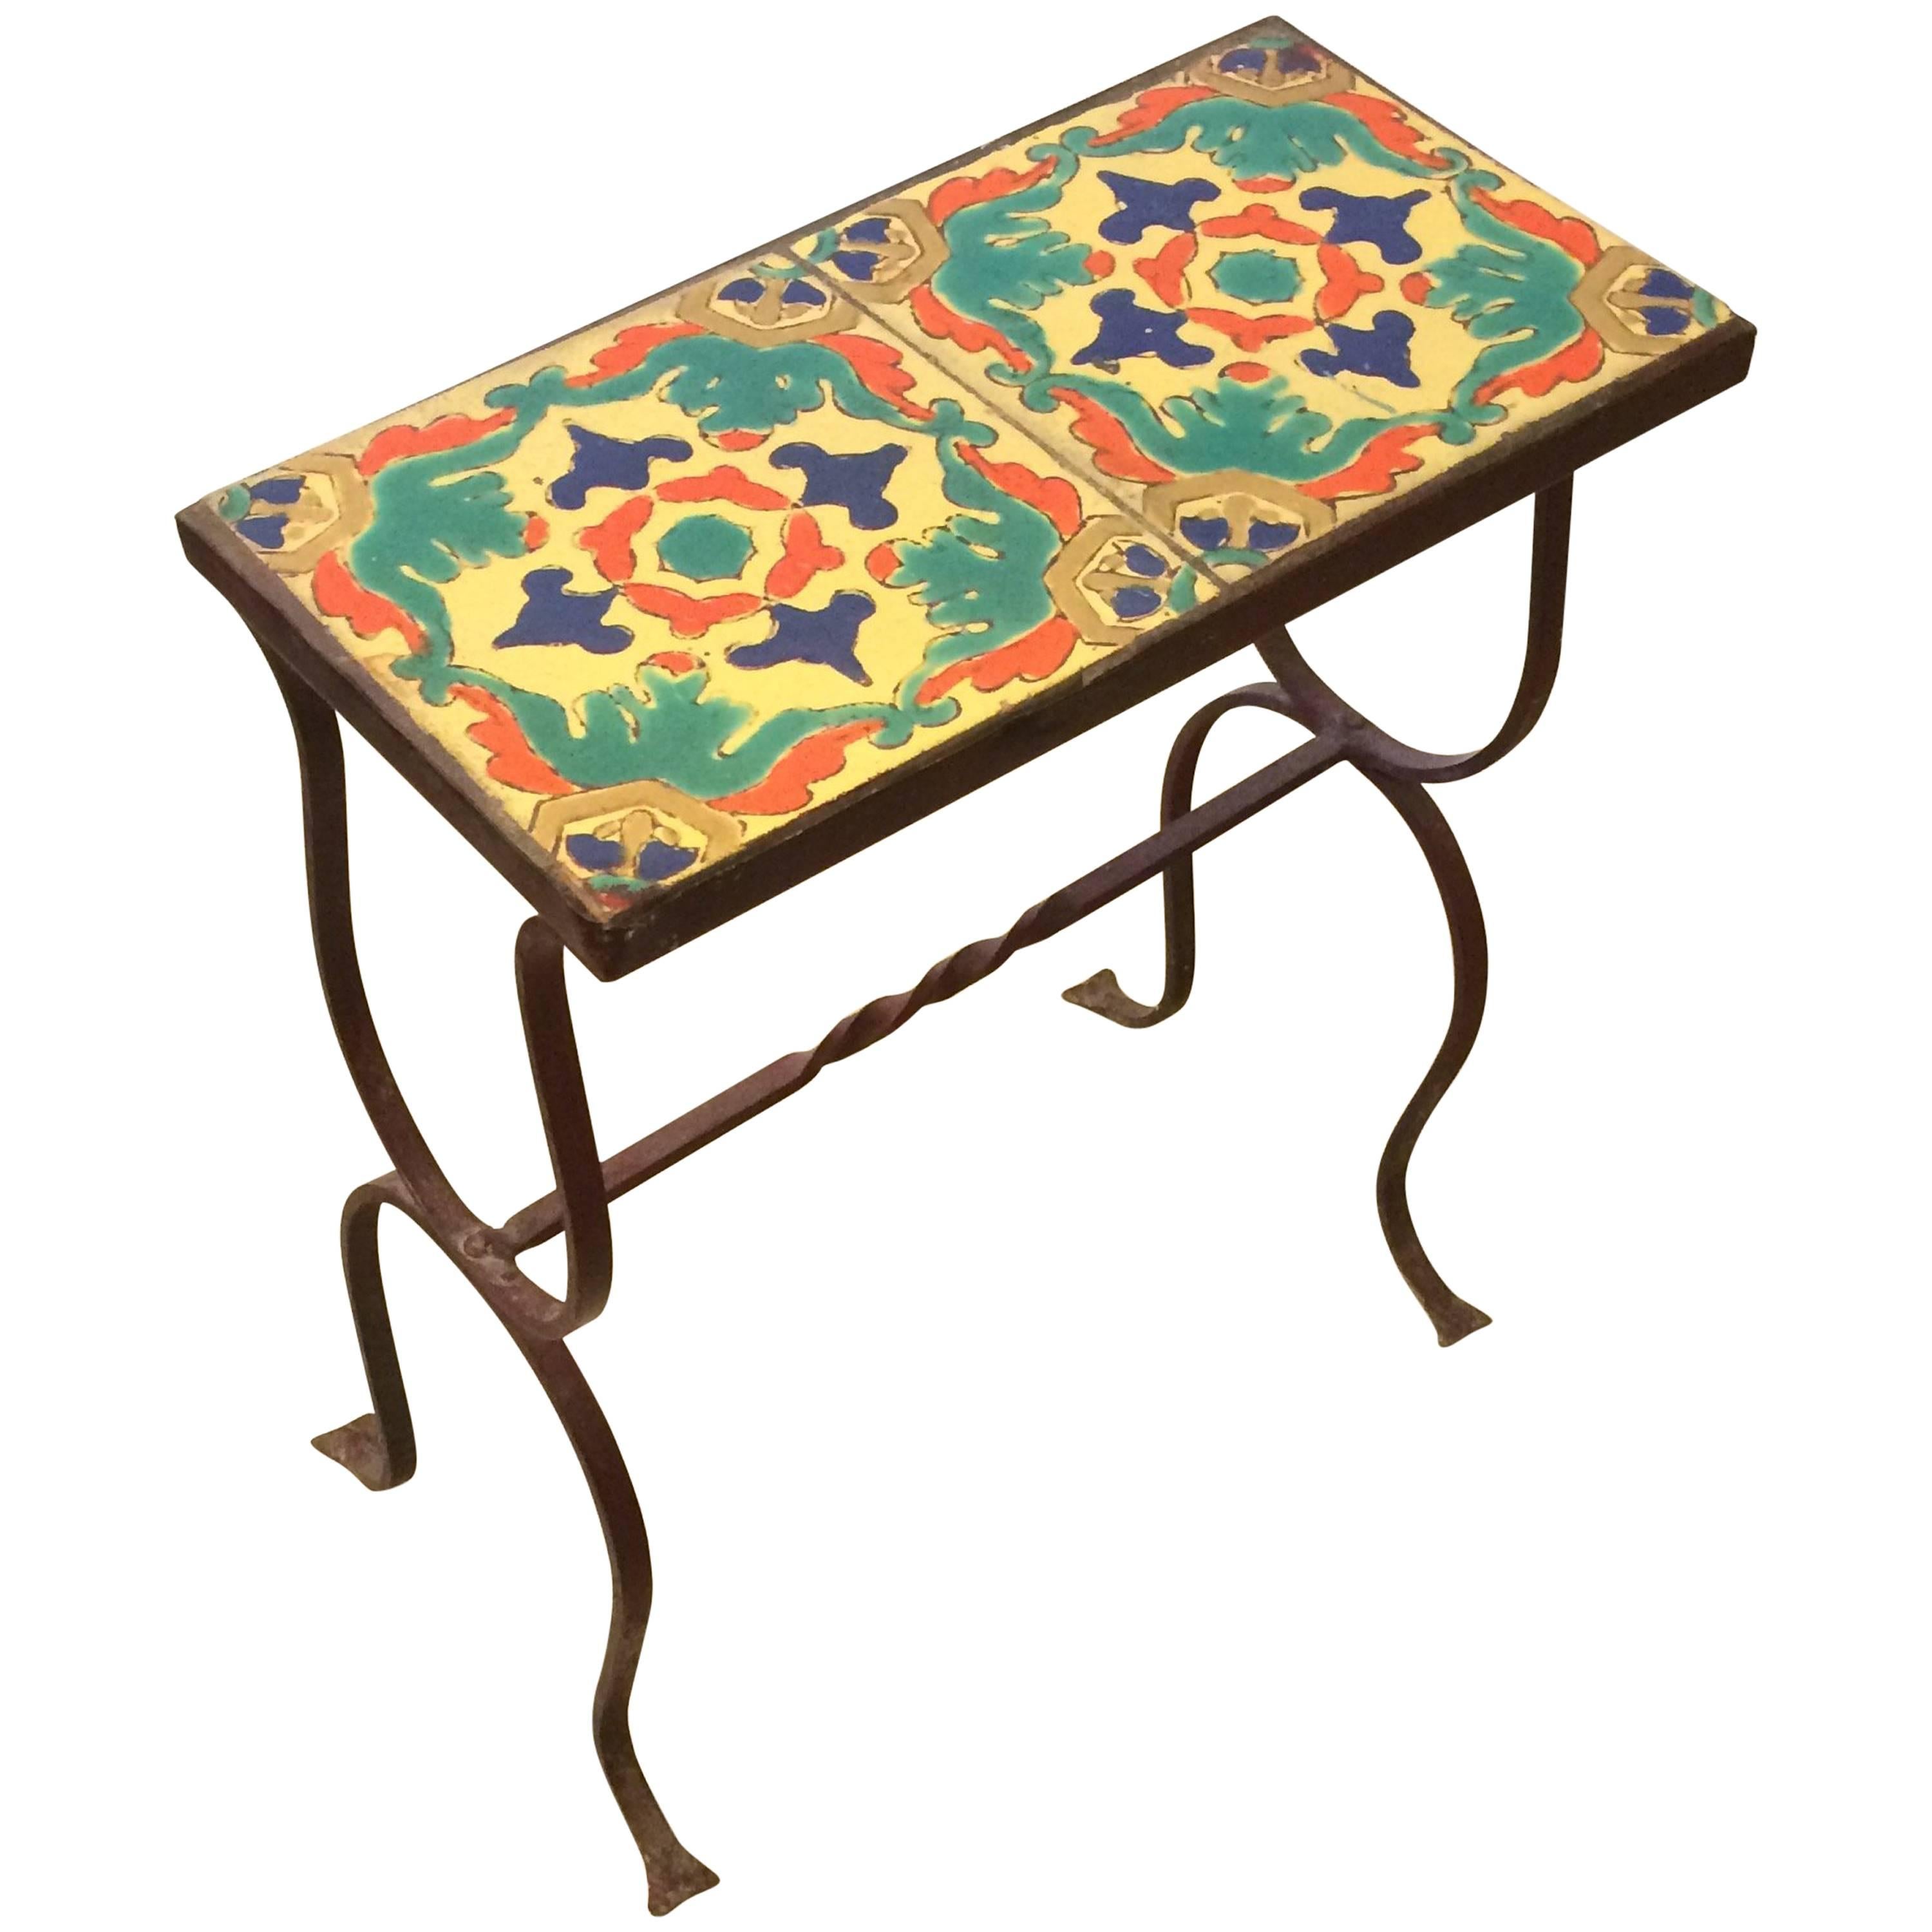 California Arts & Crafts Iron and Tile Side or Drinks Table